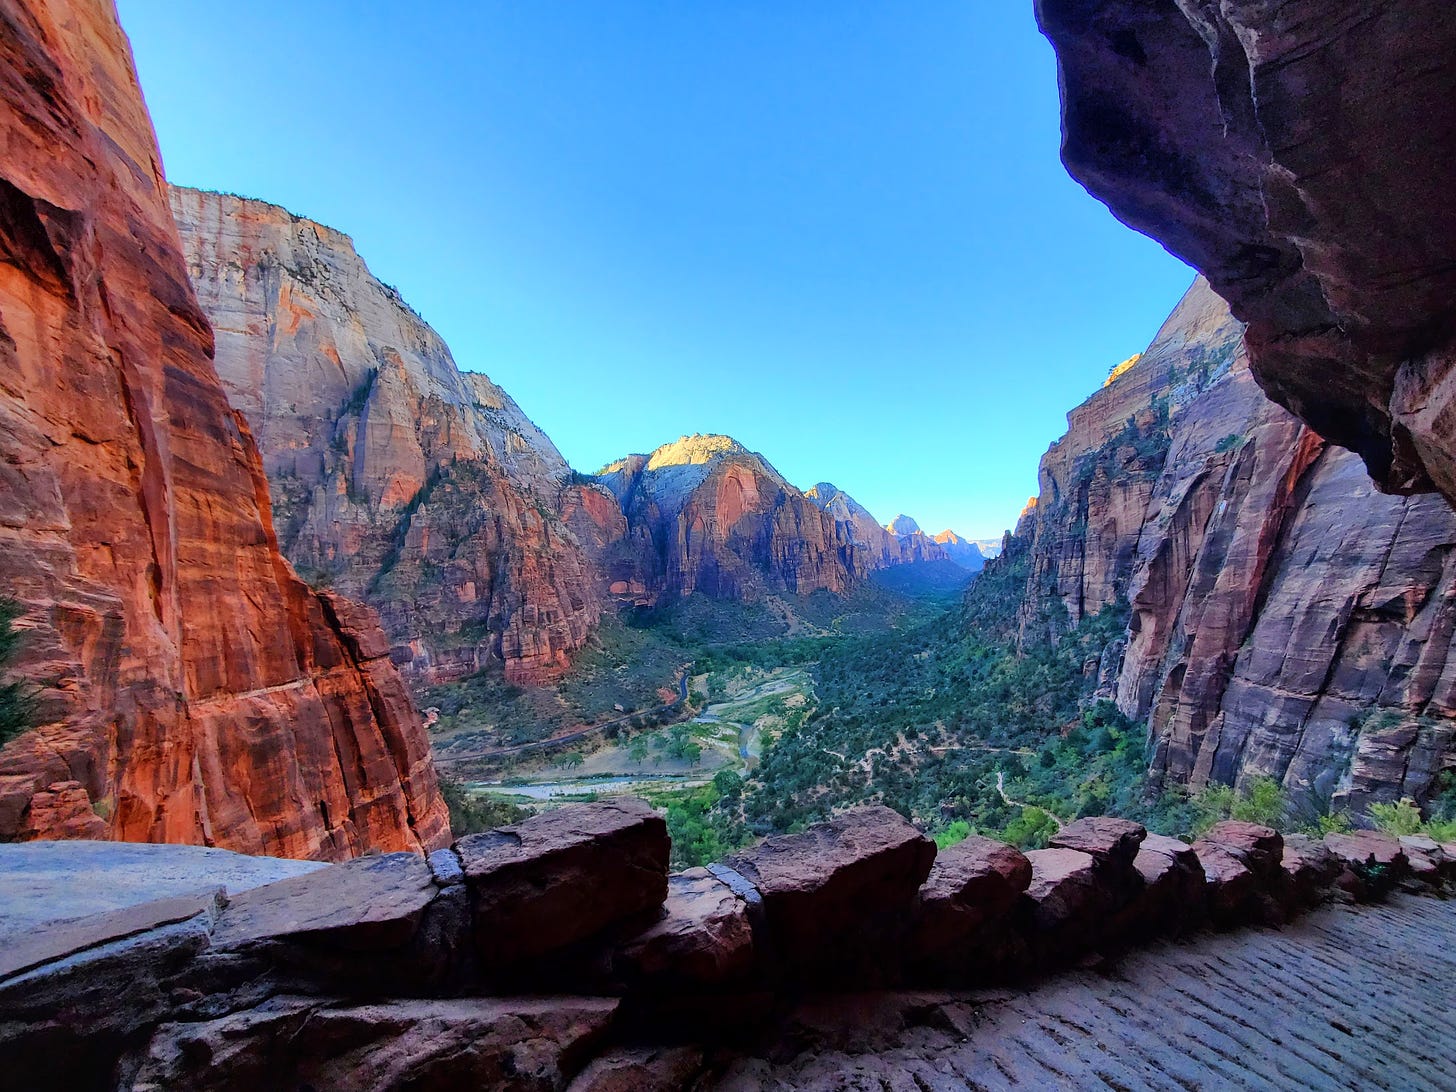 View of the valley in Zion National Park from the ramps up to Angel's Landing